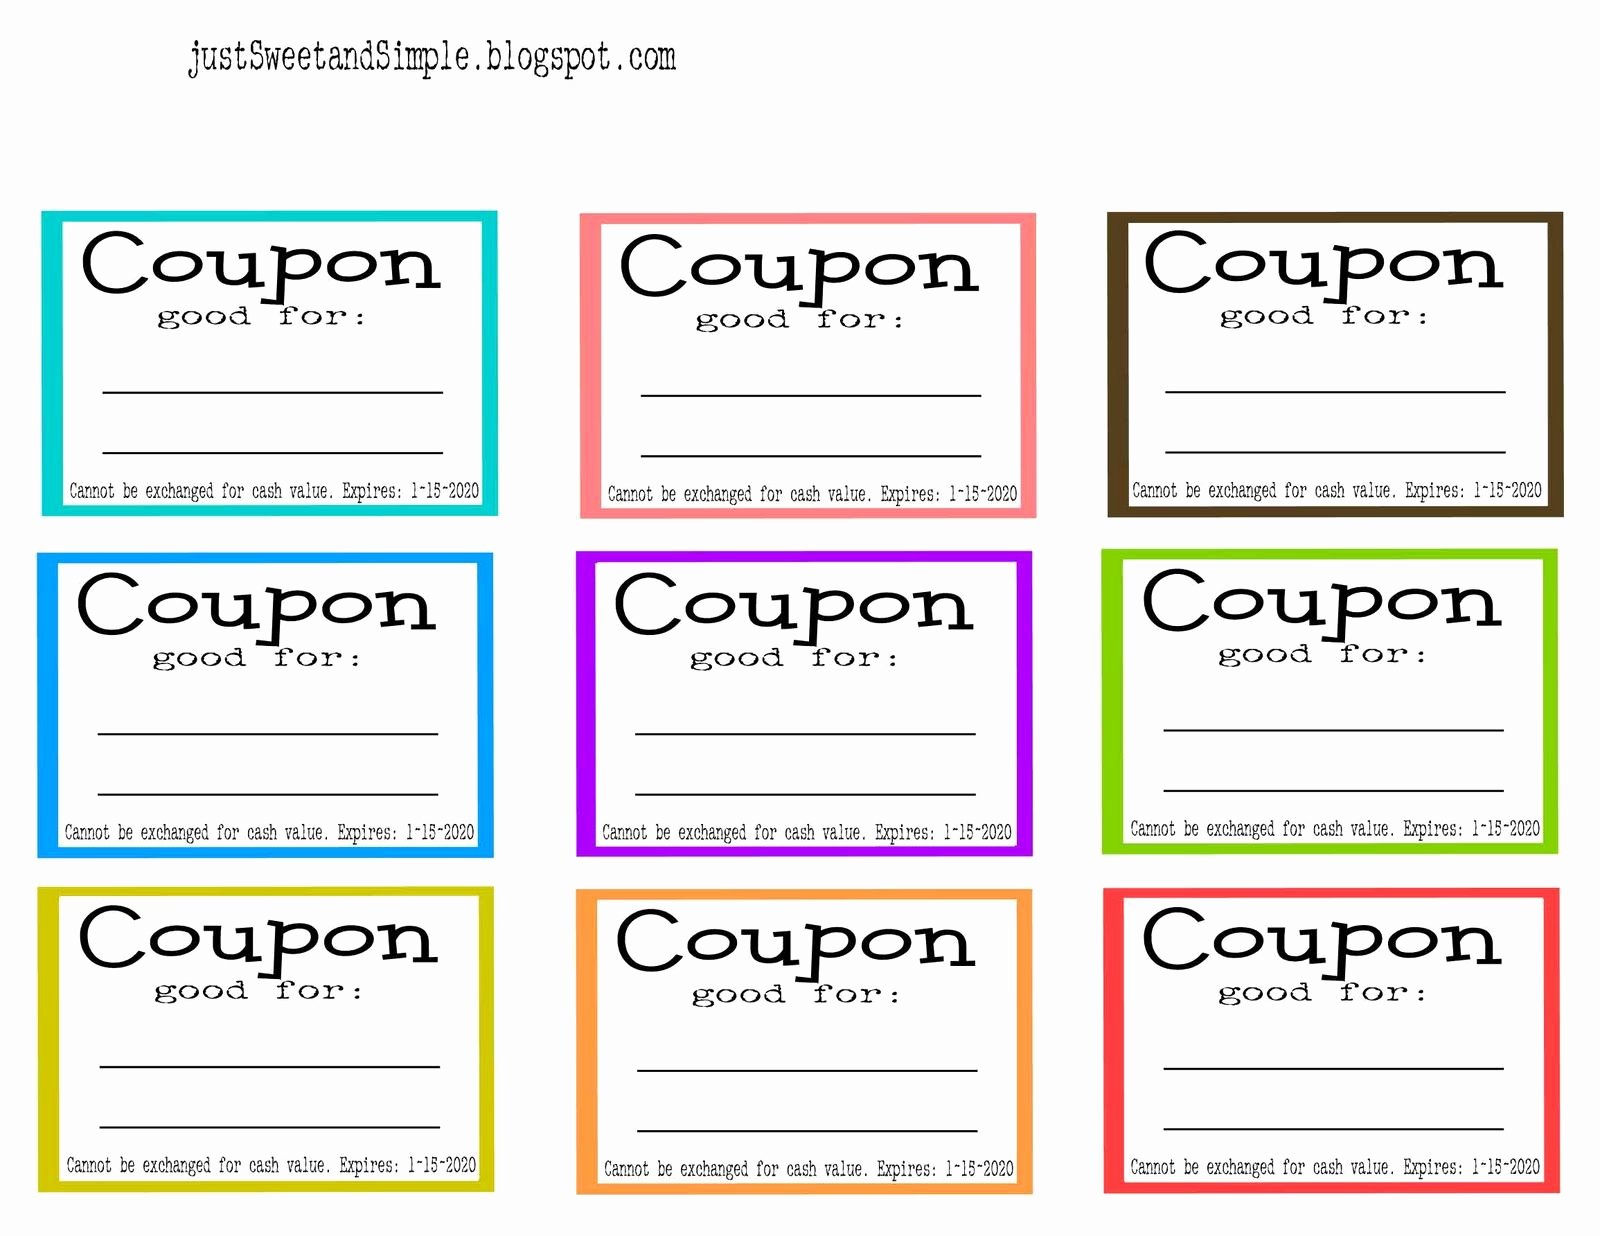 How to Design A Coupon New Chores and Cleaning Ideas for Kids